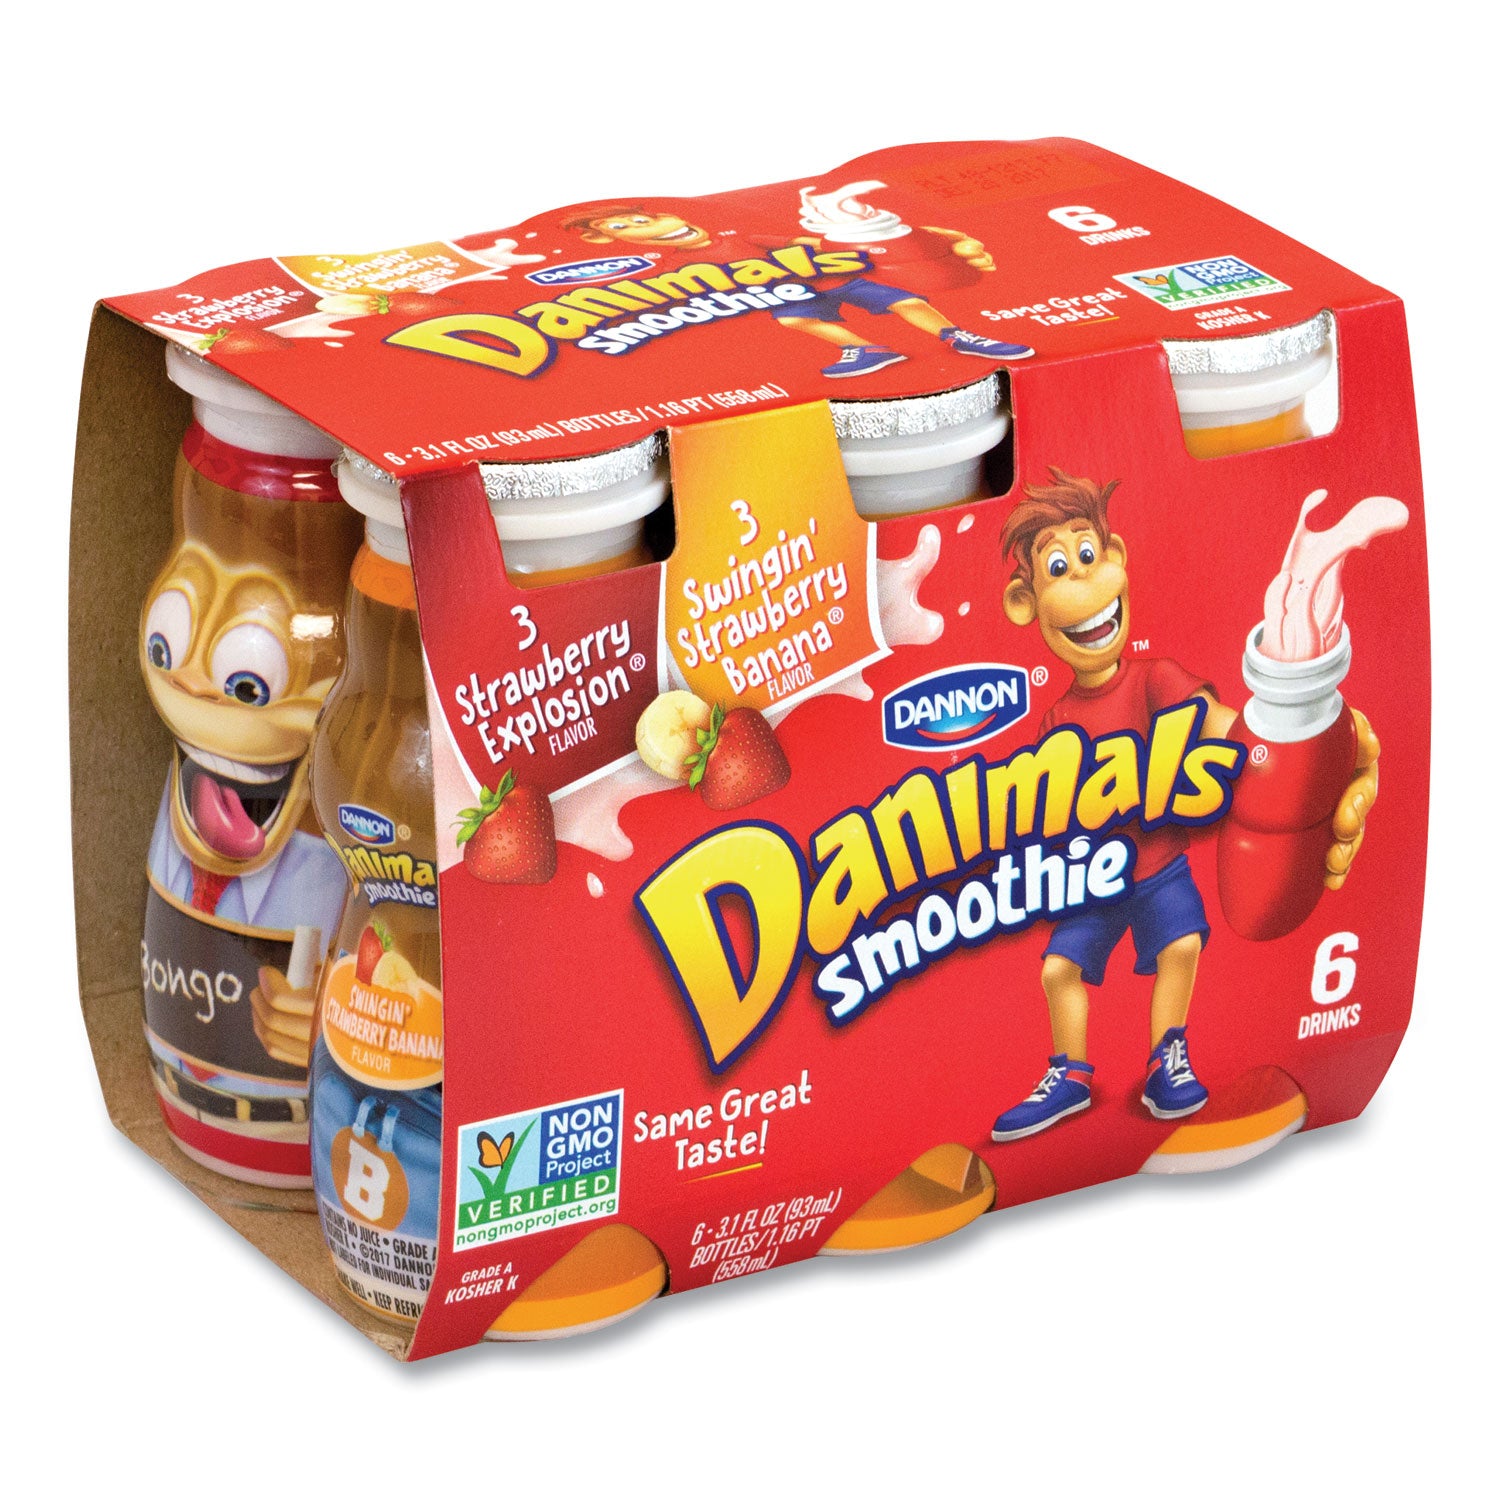 danimals-smoothies-assorted-flavors-31-oz-bottle-6-box-6-boxes-carton-ships-in-1-3-business-days_grr90200019 - 1